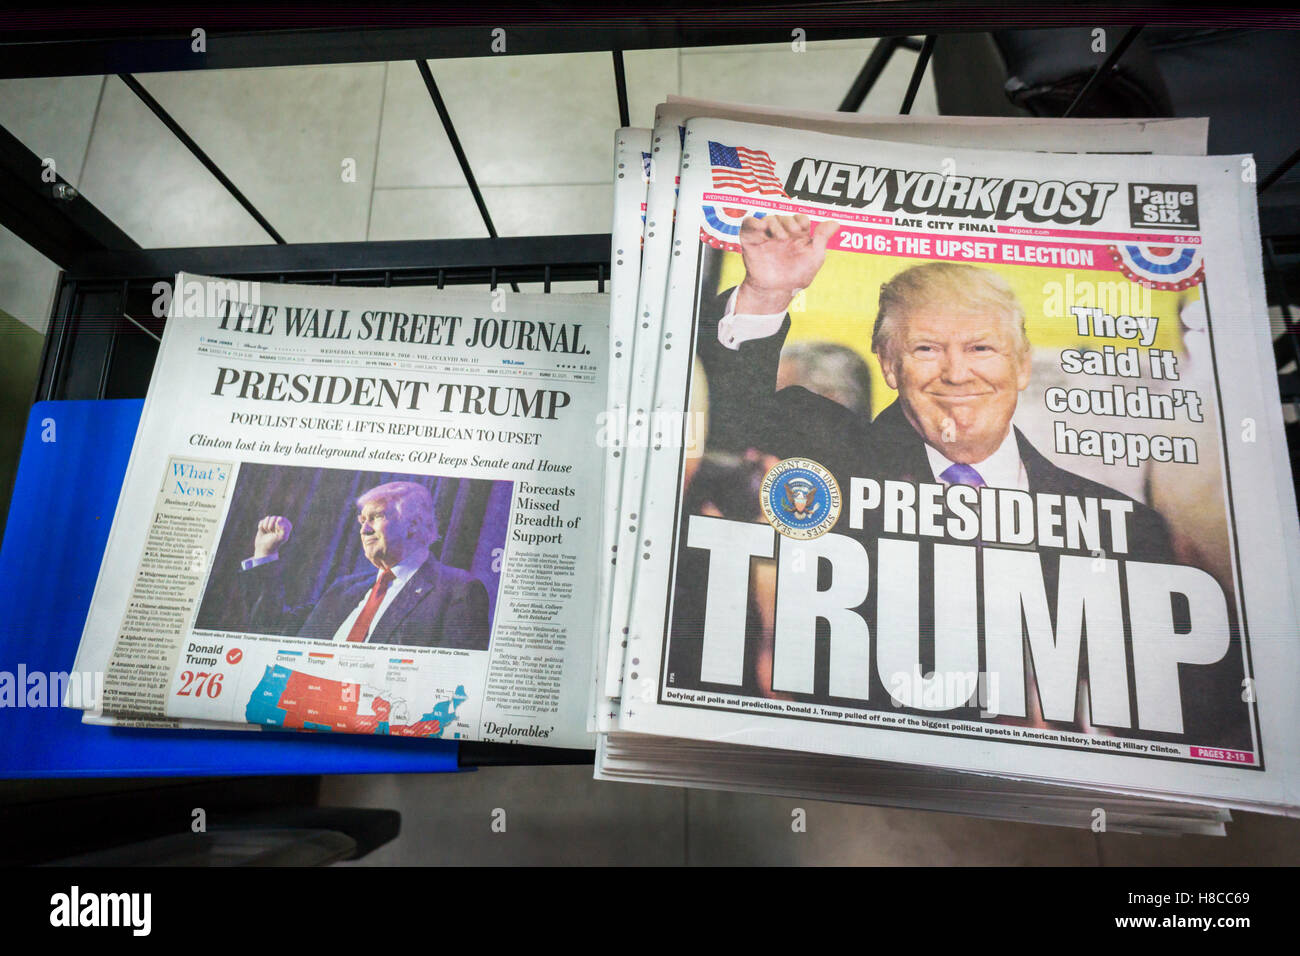 Despite the 3:00 AM concession, the News Corp. newspapers in New York came out with a print edition in time for the morning, seen on a newsstand in New York on Wednesday, November 9, 2016. Hillary Clinton conceded the election at about 3:00 AM making it a late night for everyone.  (© Richard B. Levine) Stock Photo